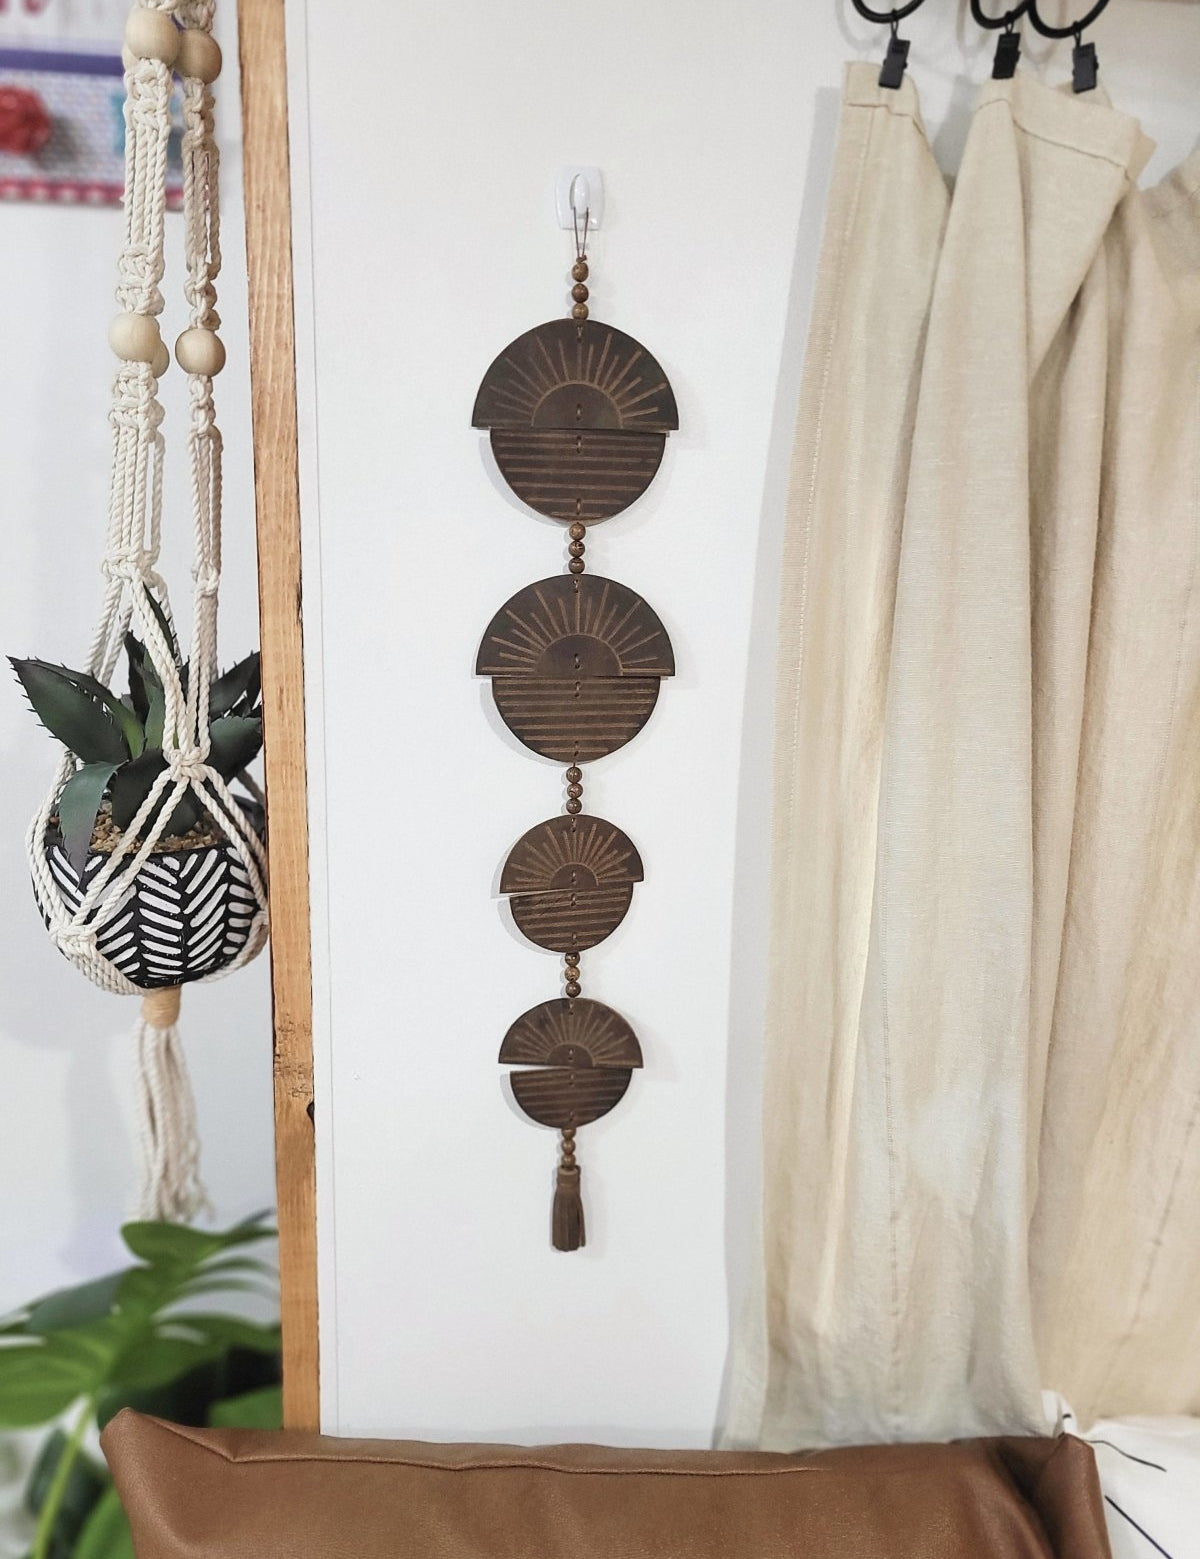 Sol Child Leather Wall Decor - leather wall hanging